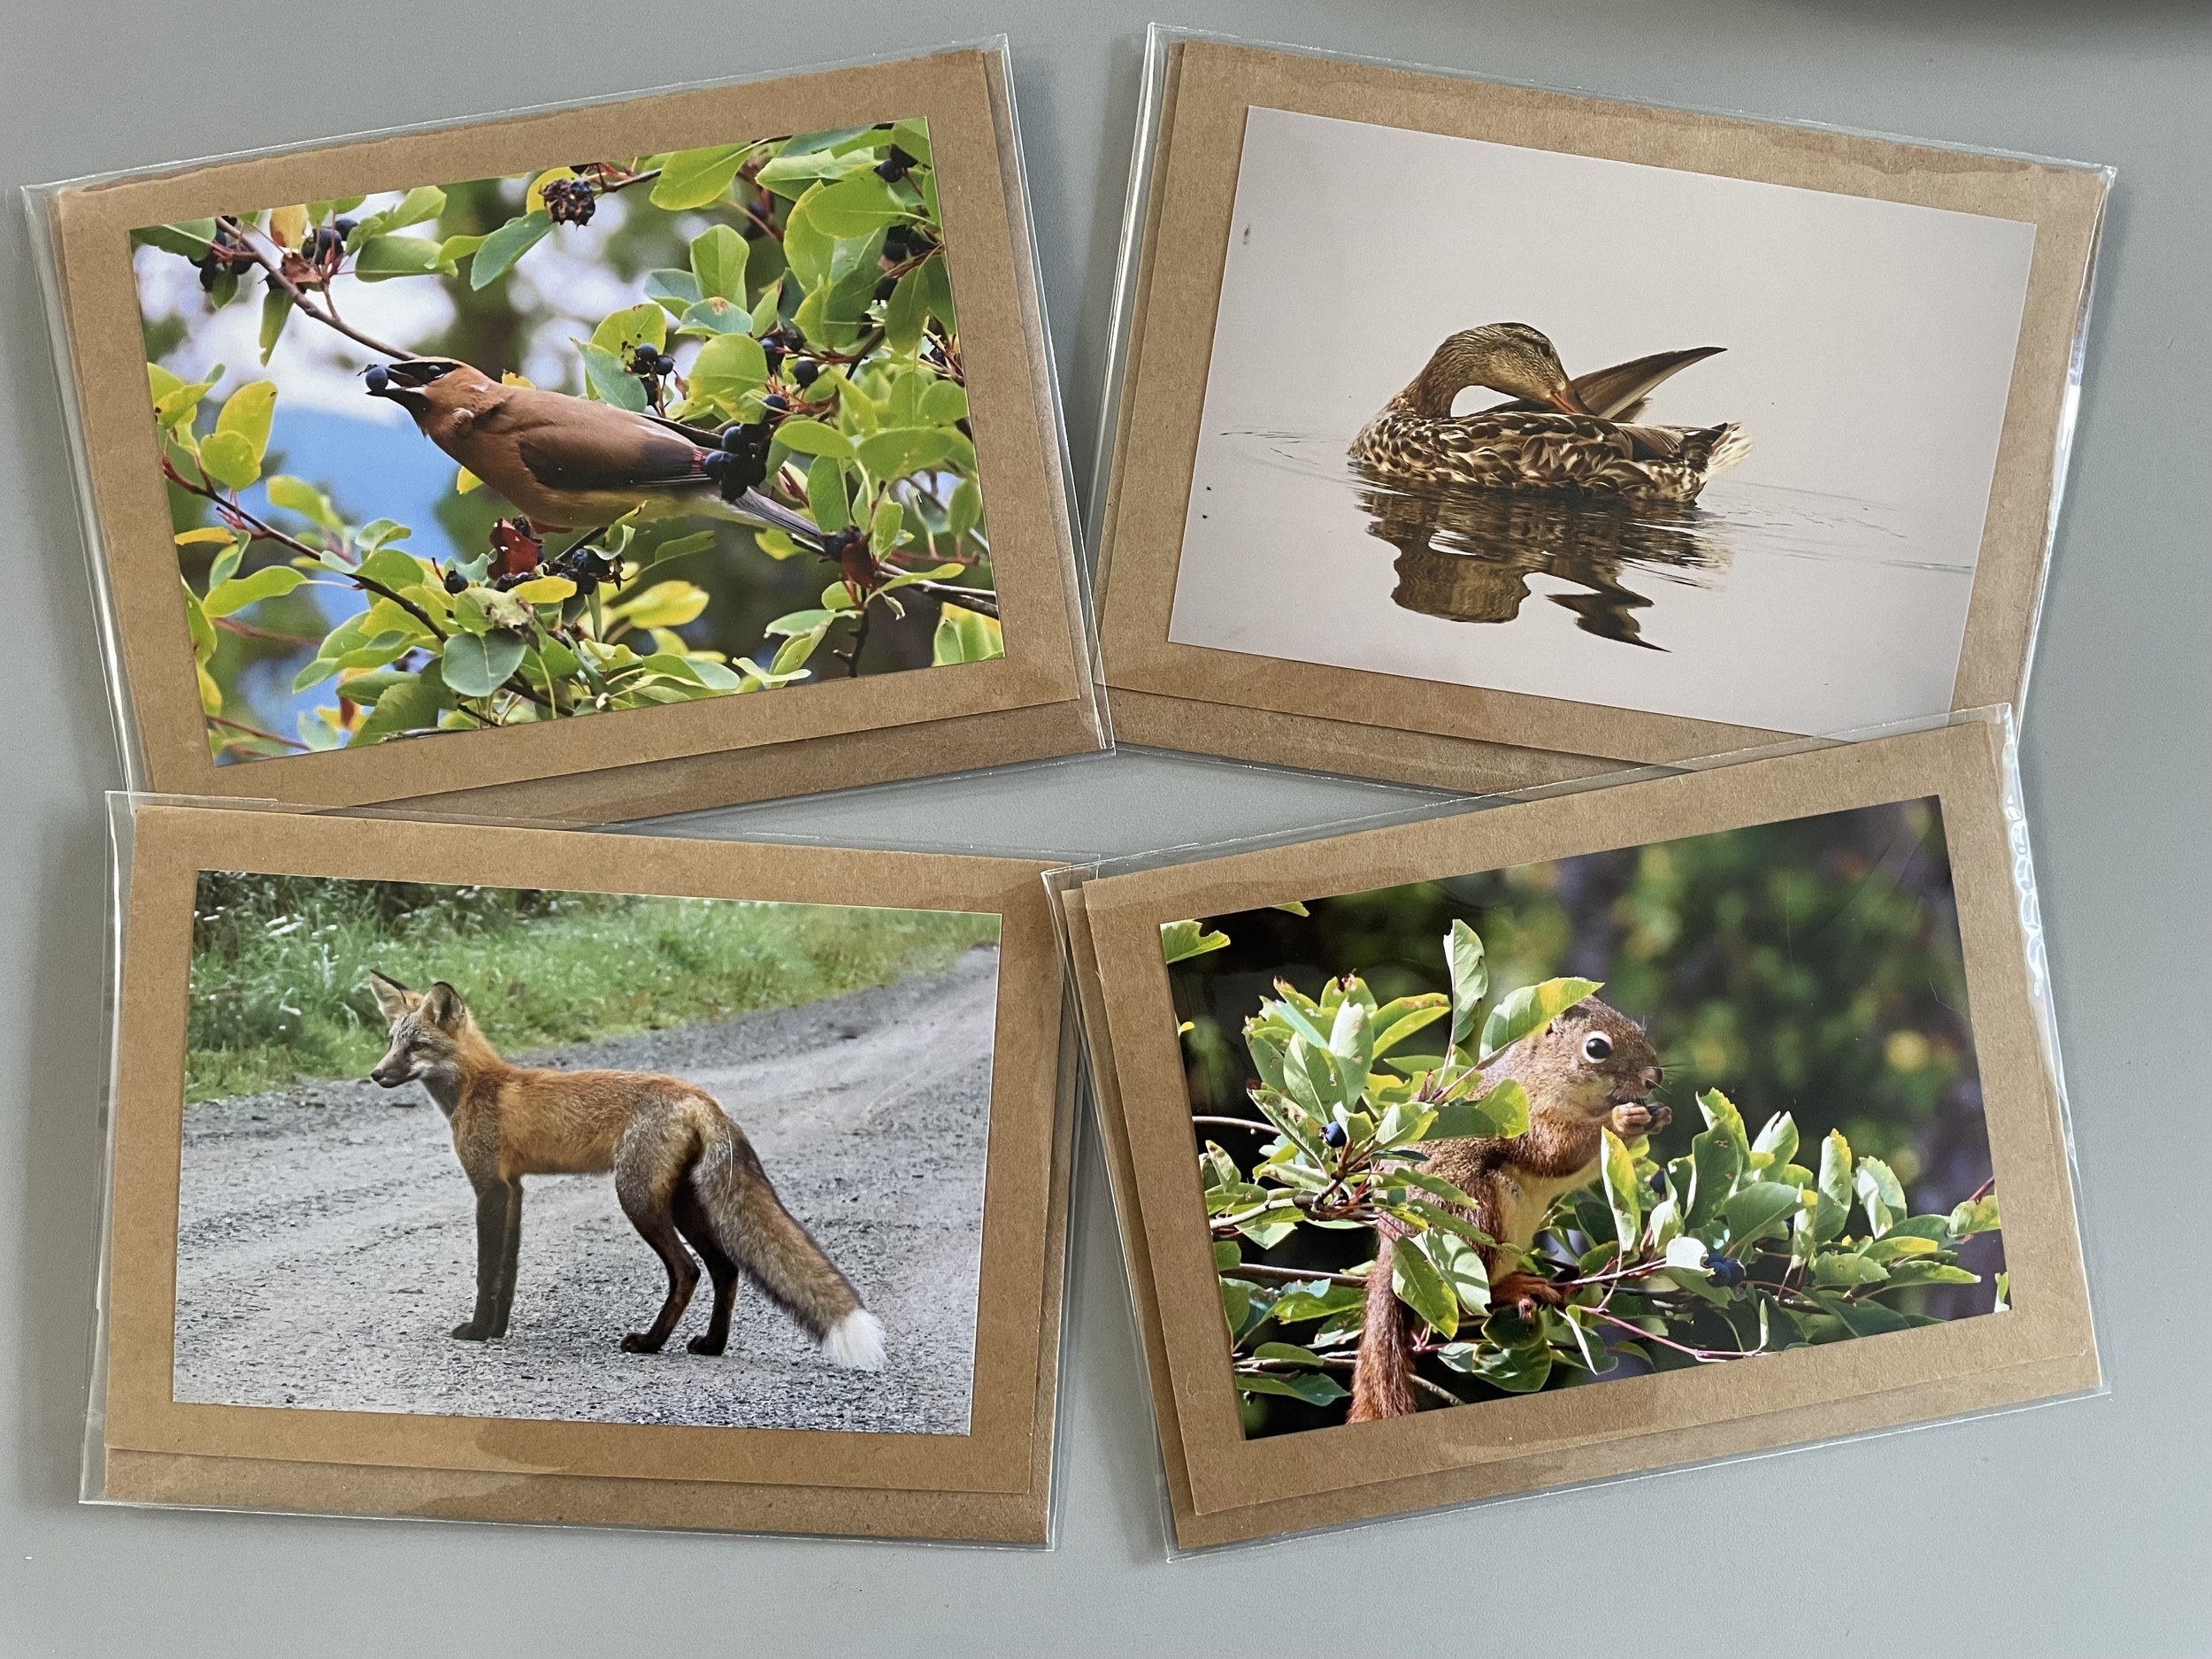 We have 17 greeting cards featuring local wildlife! Photos taken by Eileen LeFrancois